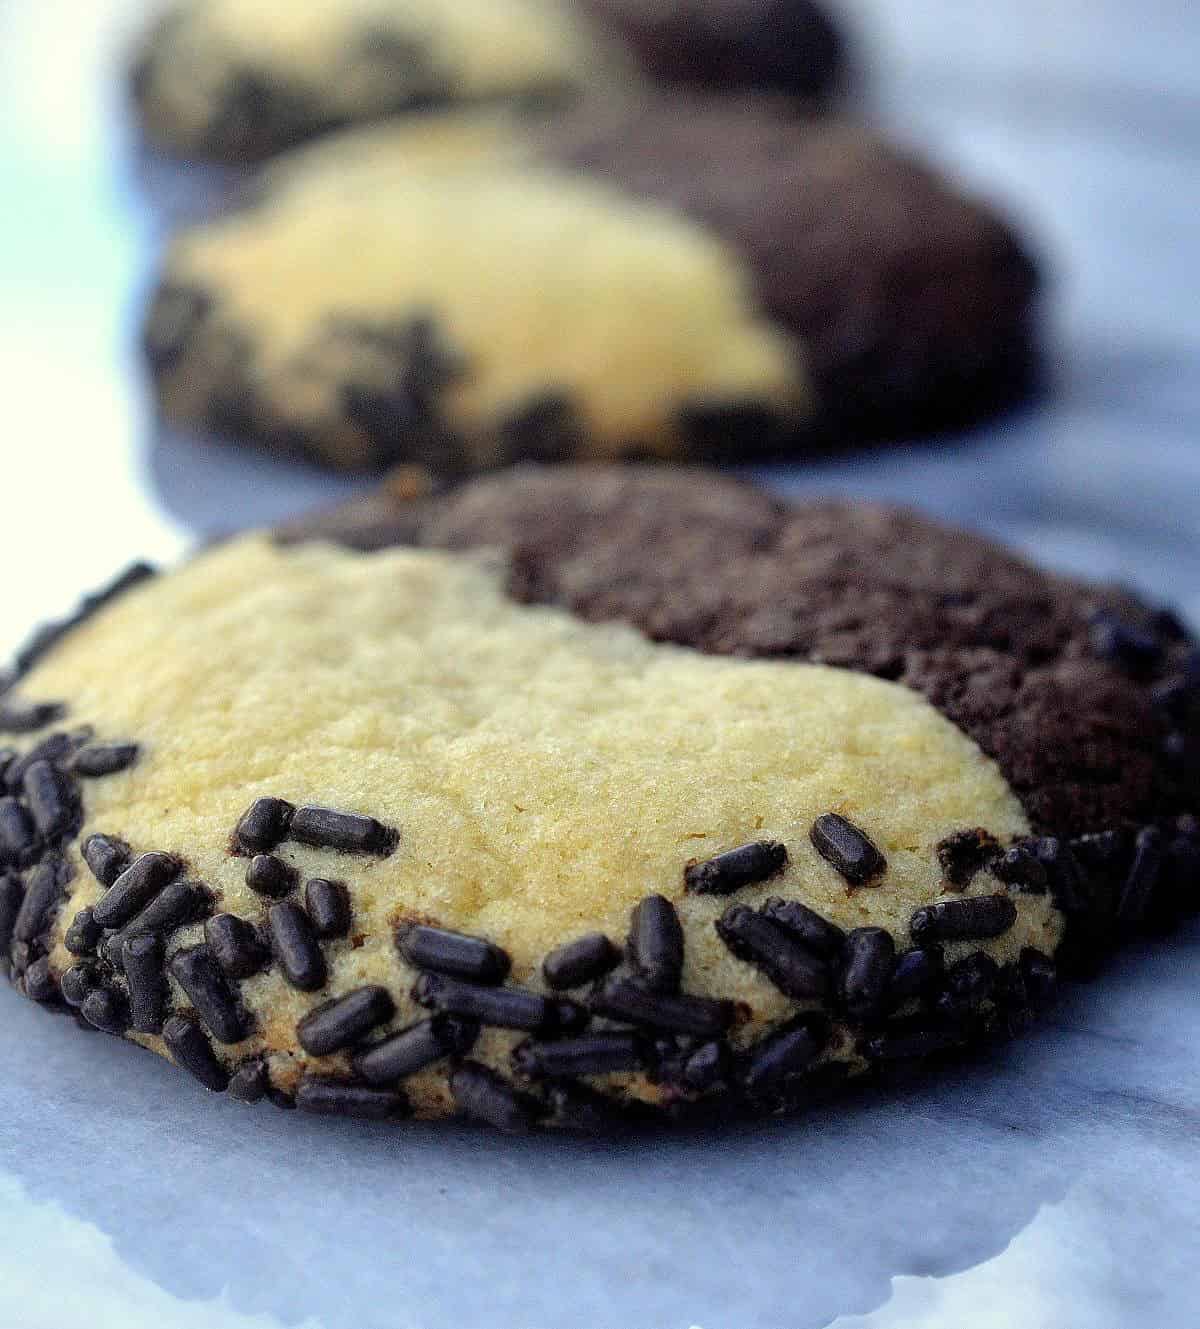  These cookies are great for sharing with friends and family.